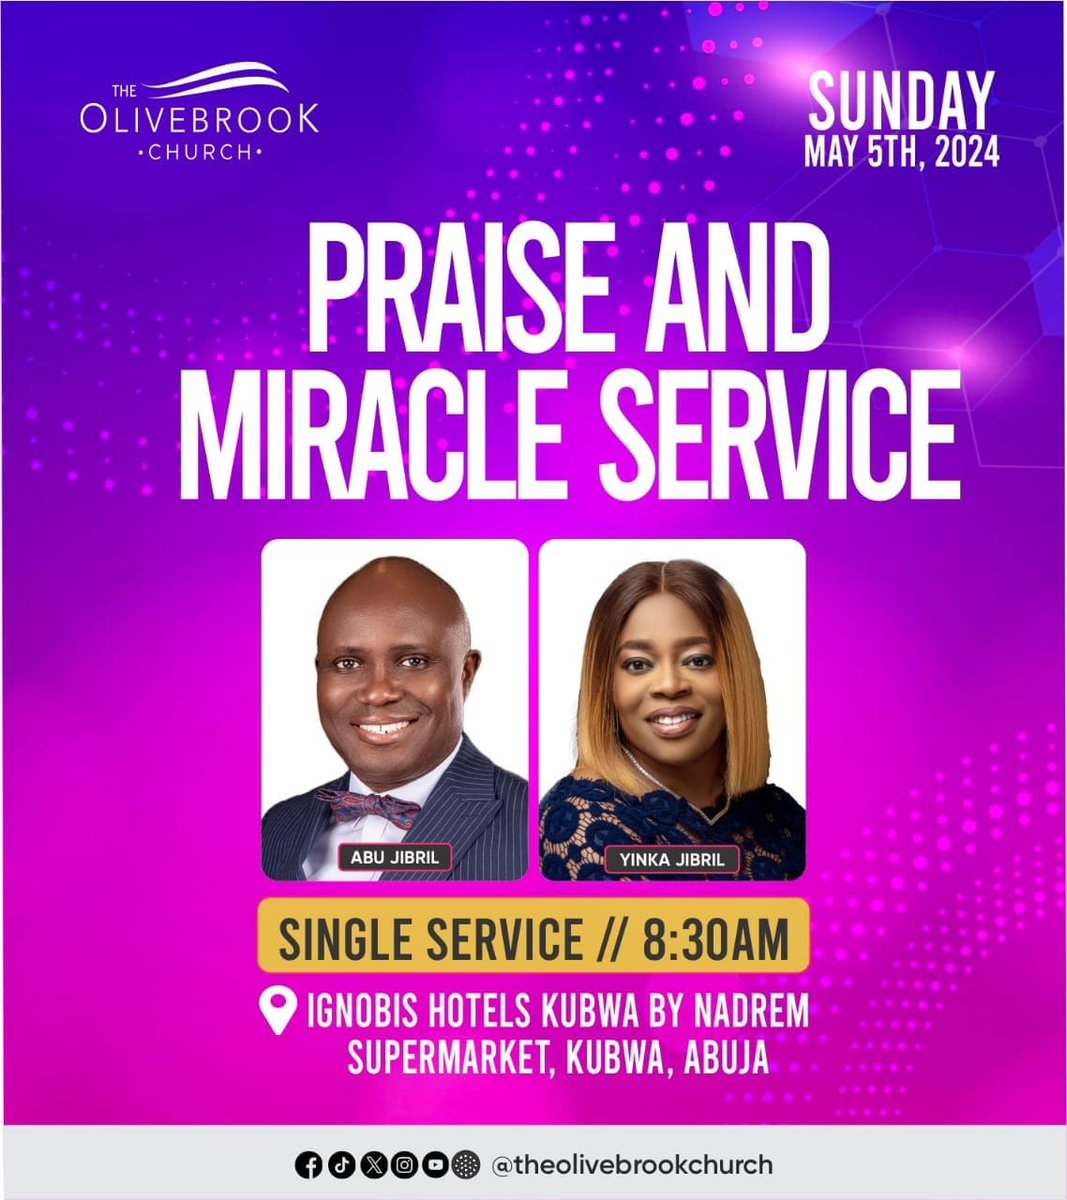 Join us tomorrow for a remarkable event!
 Experience the powerful presence of God at our praise and miracle service. 
Don't miss this uplifting gathering.
 See you there!
#Theolivebrookchurch
#PraiseAndWorship 
#Praiseandmiracle
#ExperienceTheUnforgettable 
#bethere